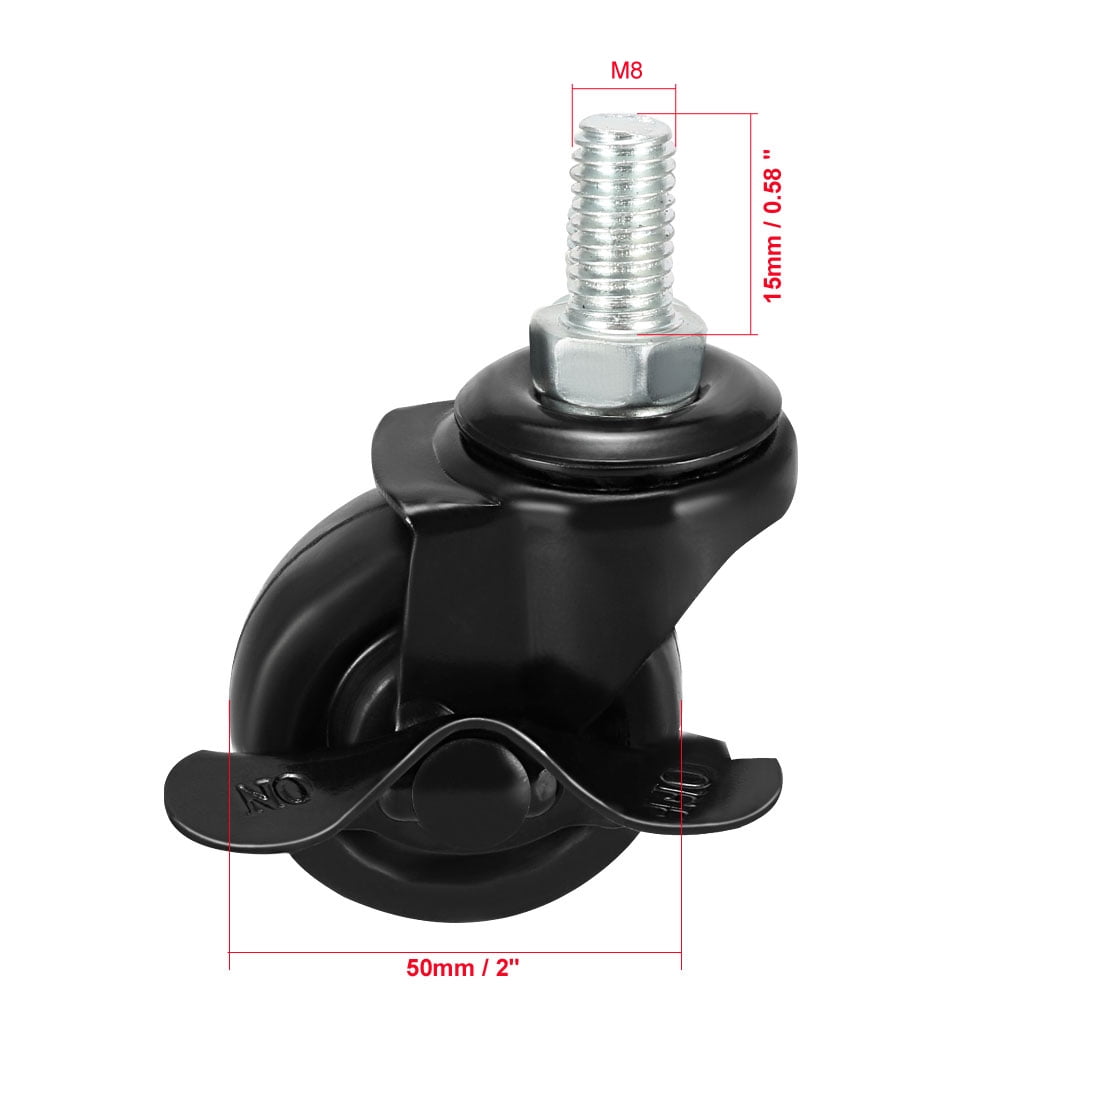 Color : Brake 2inch 50mm Caster Wheels with Ball Spherical,Threaded Stem M8x15 Mm Swivel Caster Wheels,Nylon Furniture Castors Wheels,for Sofa Baby Carriage Coffee Table,4 Pcs